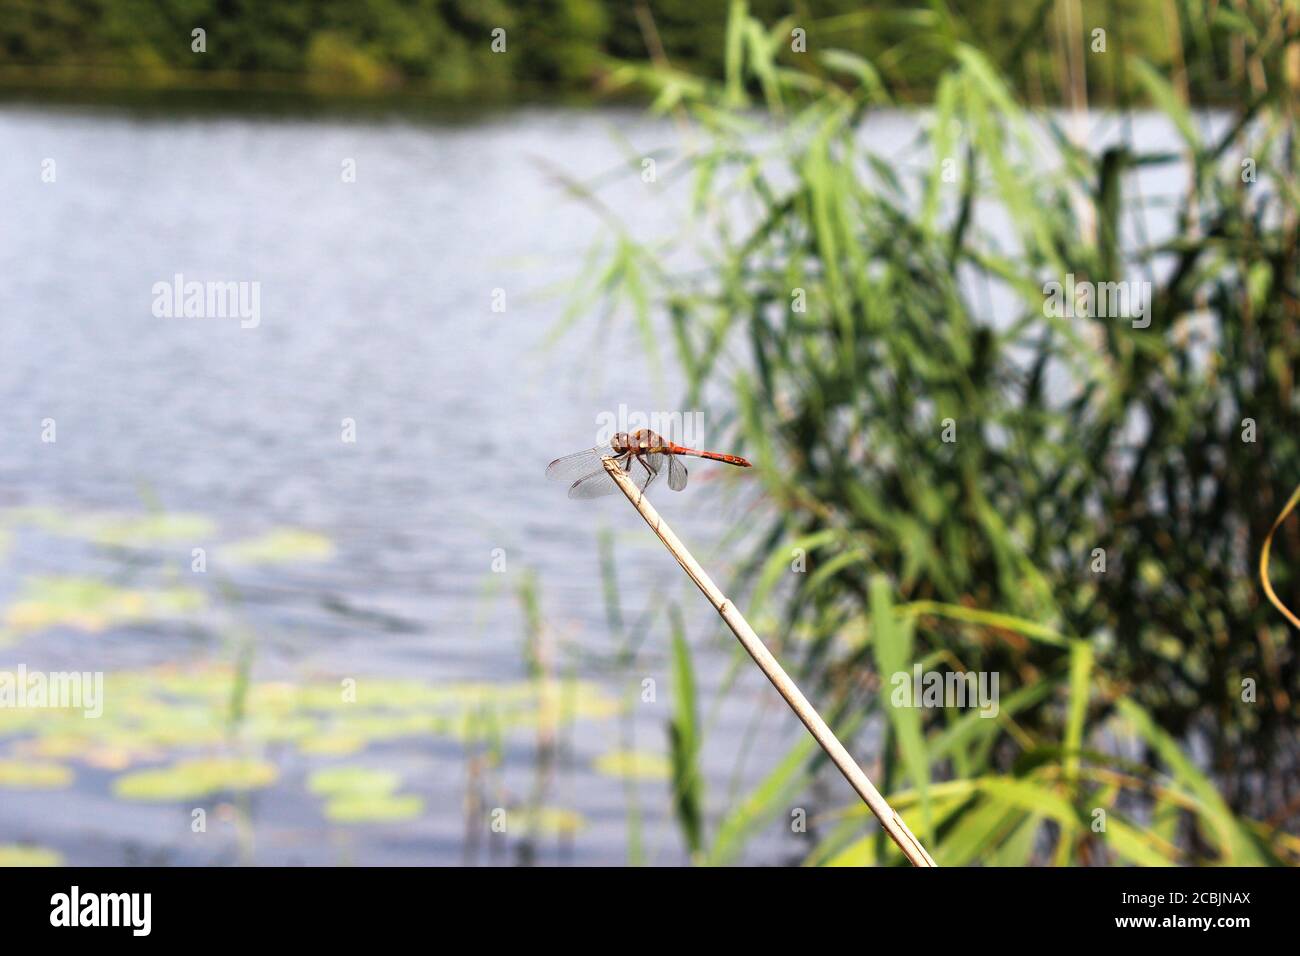 Red-veined darter dragonfly (Sympetrum fonscolombii) perching on the end of a stick on the margins of Pickmere lake in Cheshire, England Stock Photo